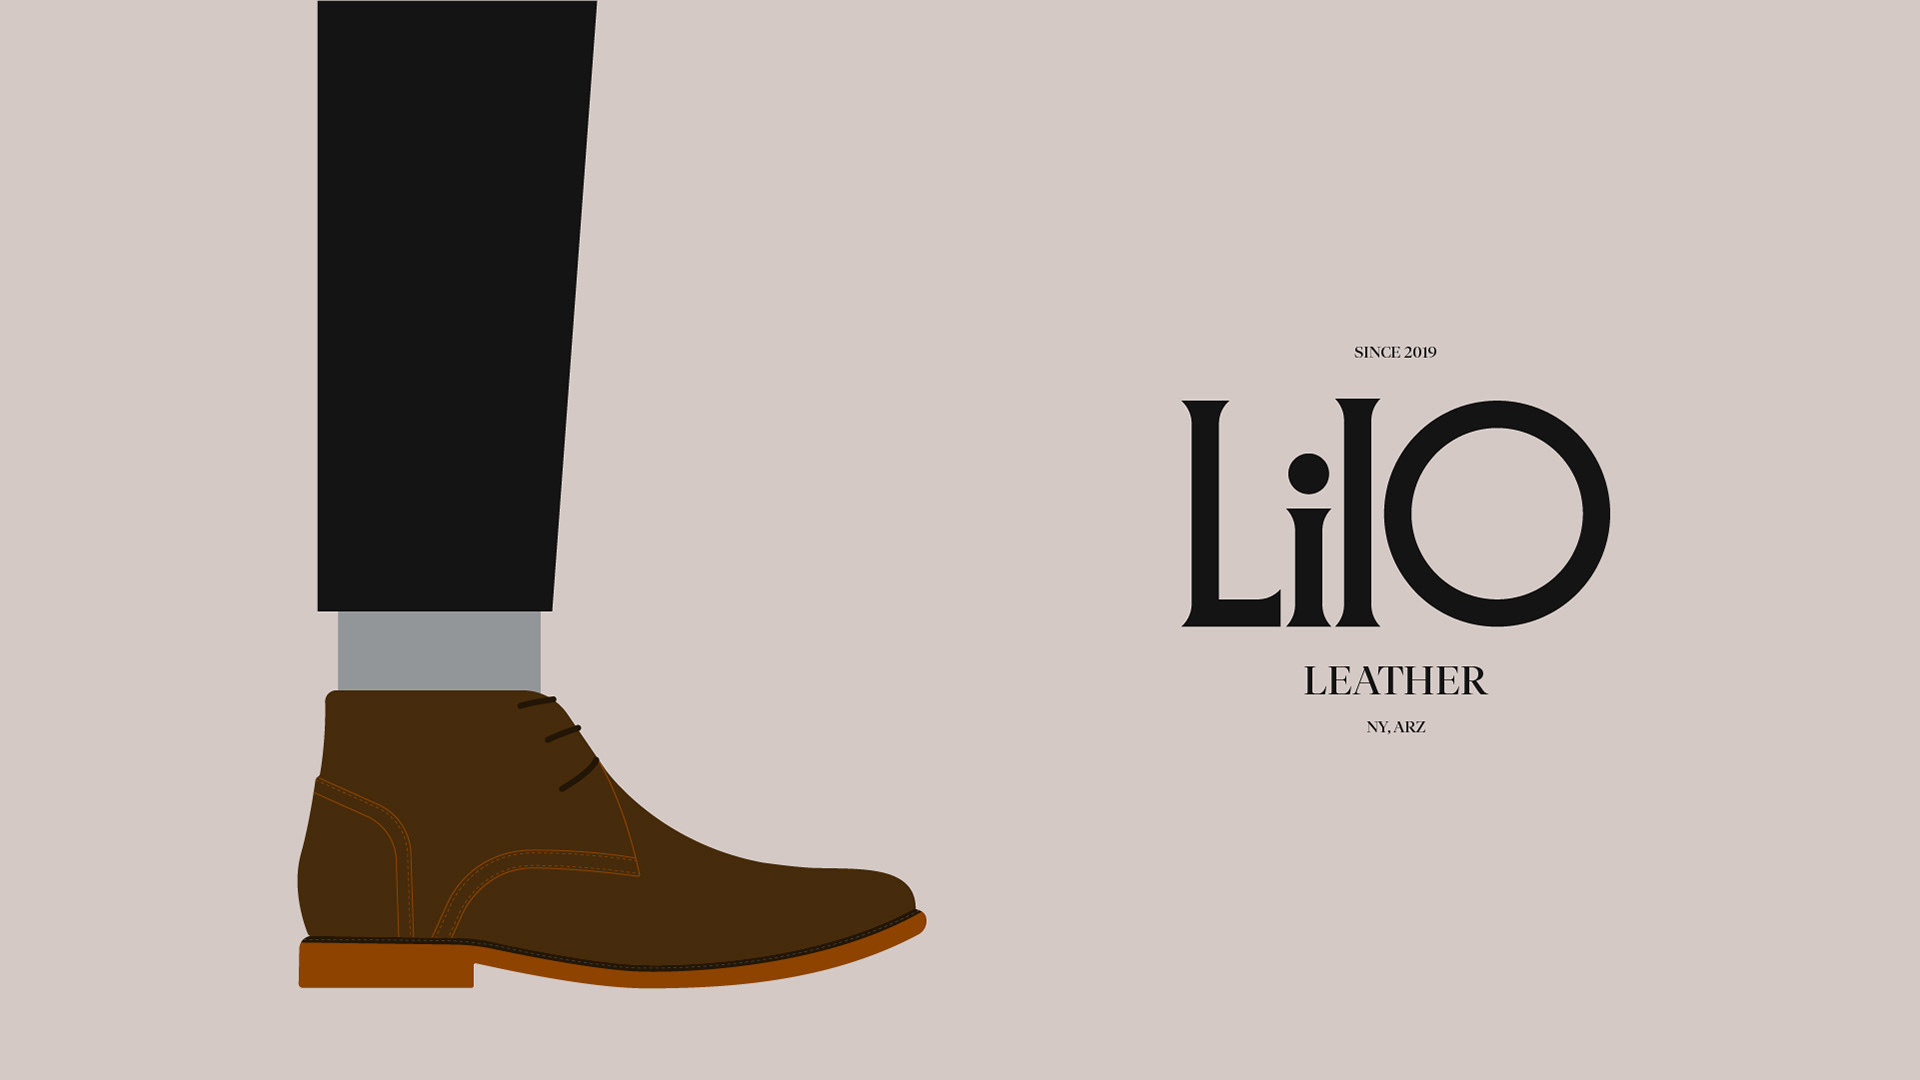 Branding for Lilo™, a brand for men's shoes 100% recycled leather